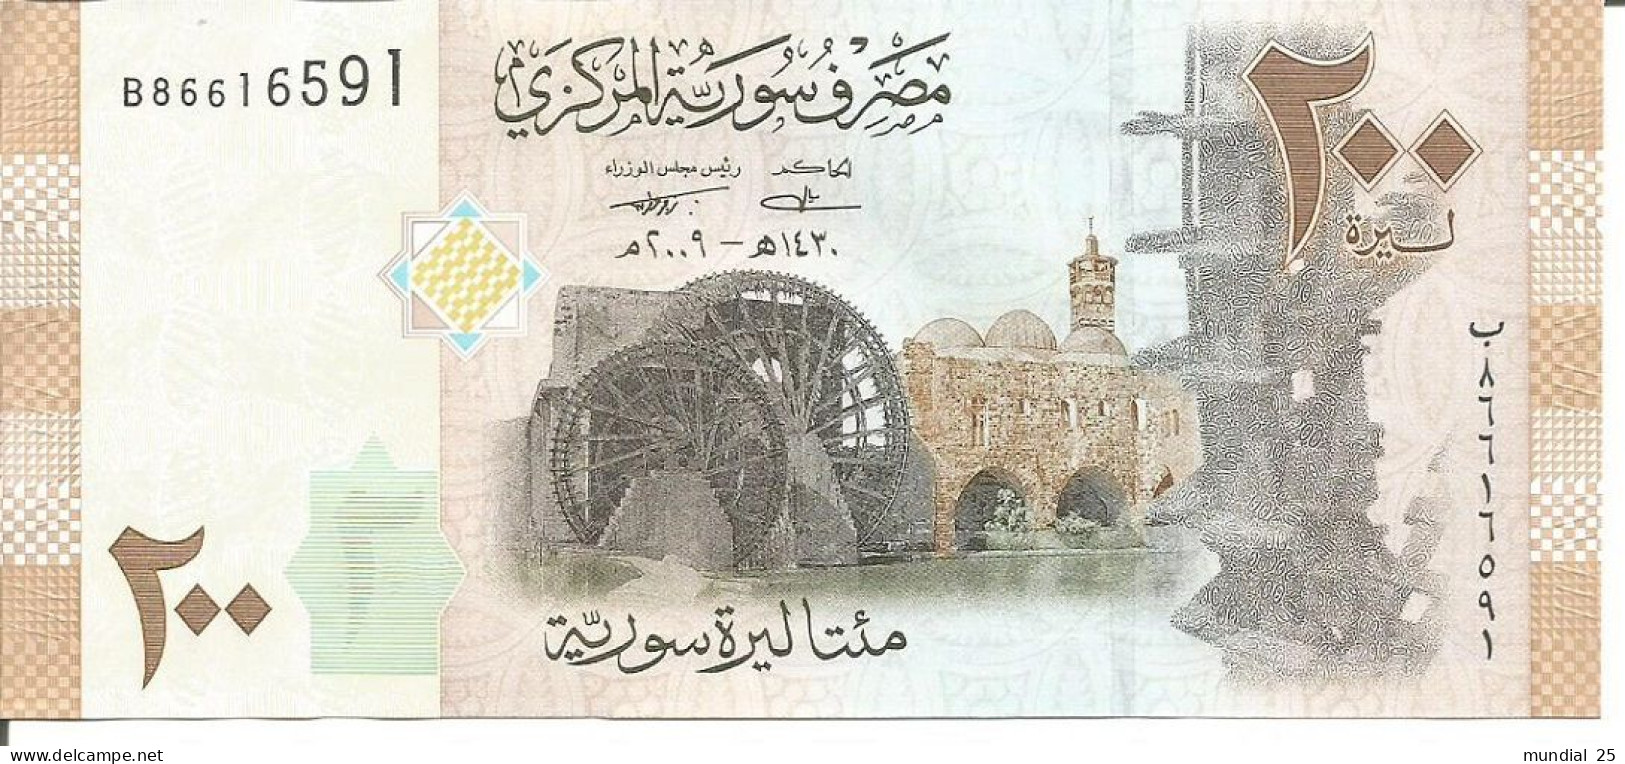 2 SYRIA NOTES 200 POUNDS 2009 - Syrie